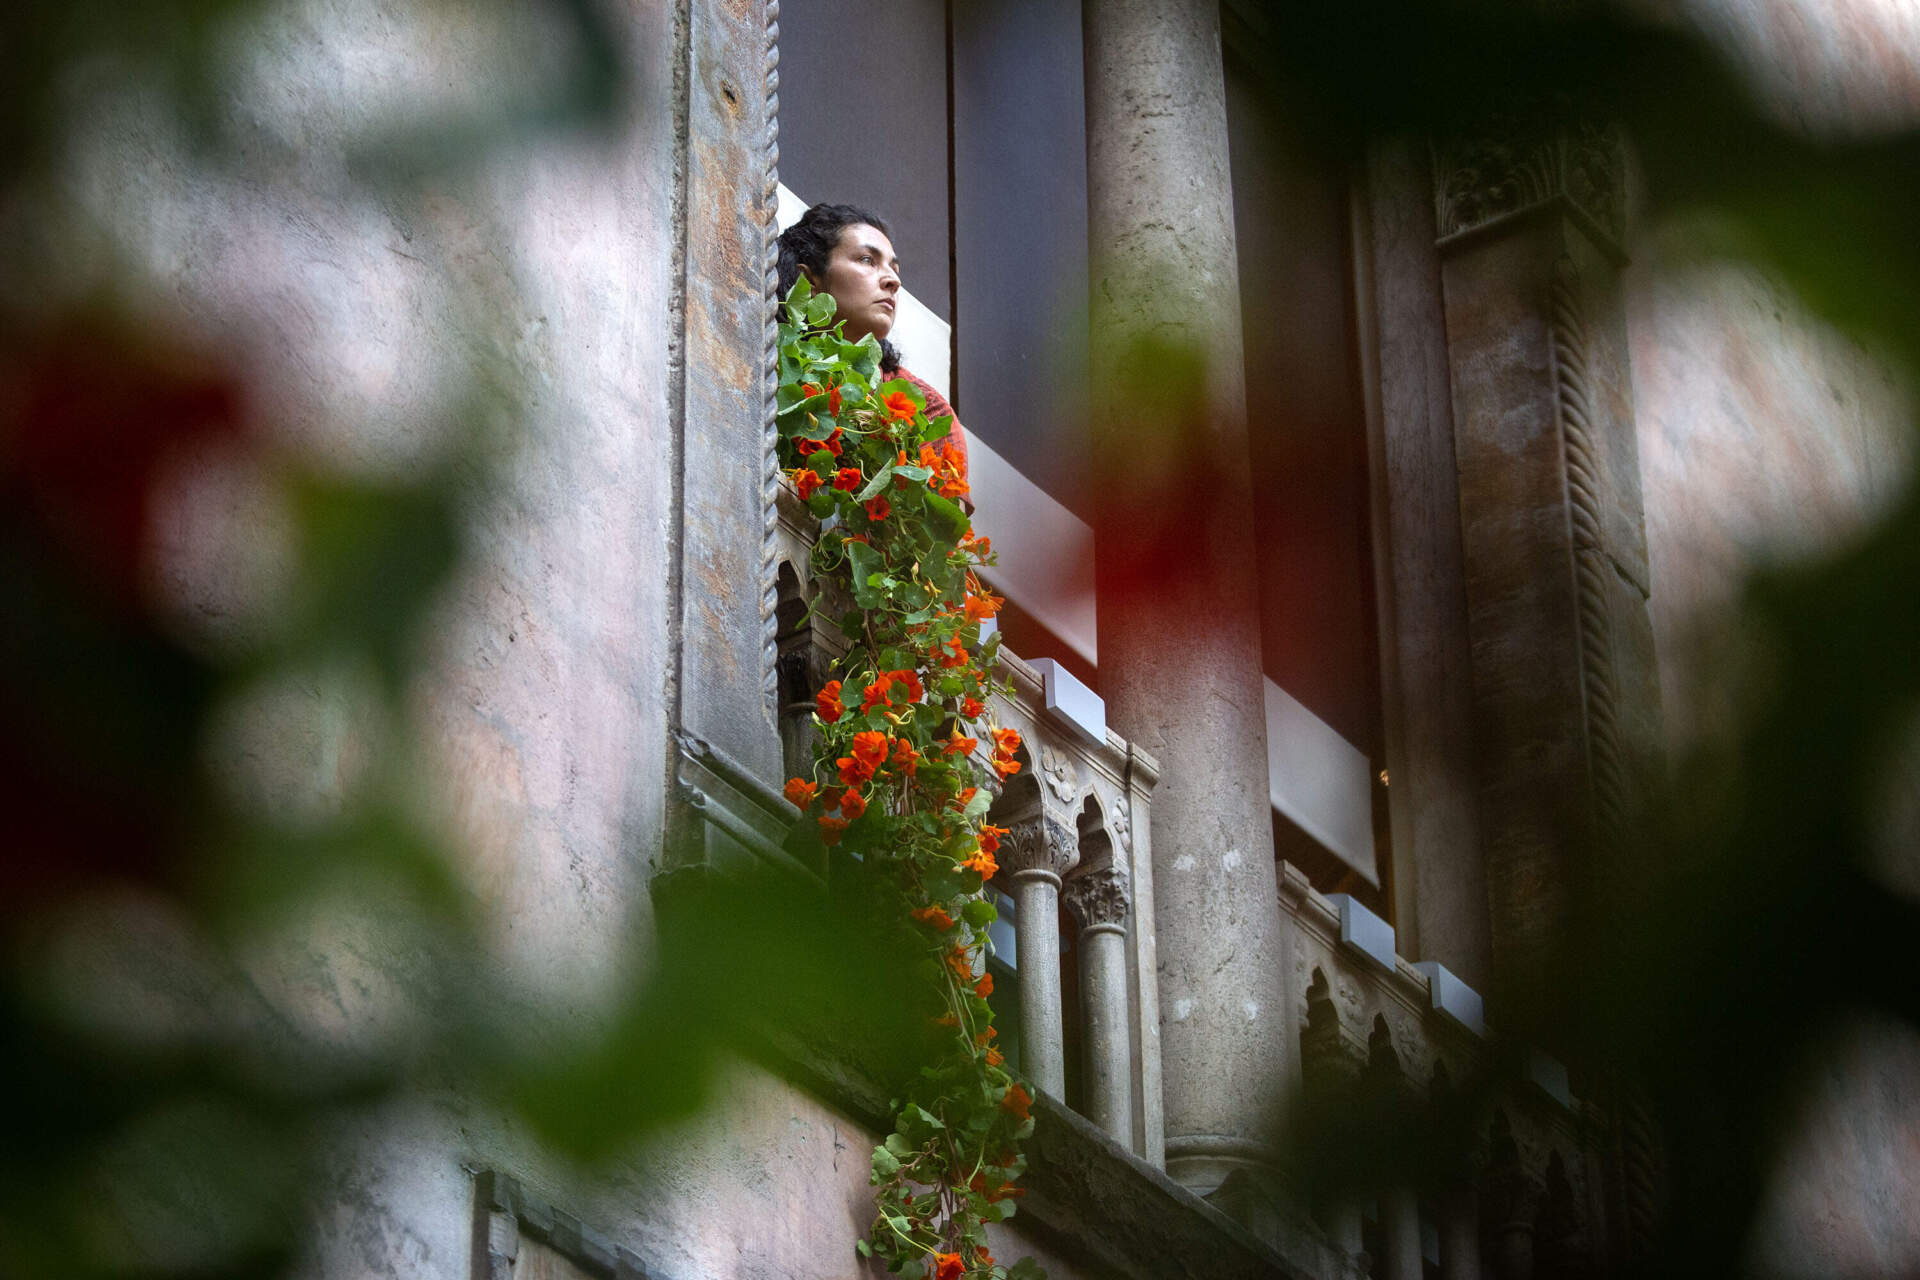 Horticulture Director Erika Rumbley carefully lowers nasturtiums out of a window into the courtyard of the Isabella Stewart Gardner Museum. (Robin Lubbock/WBUR)